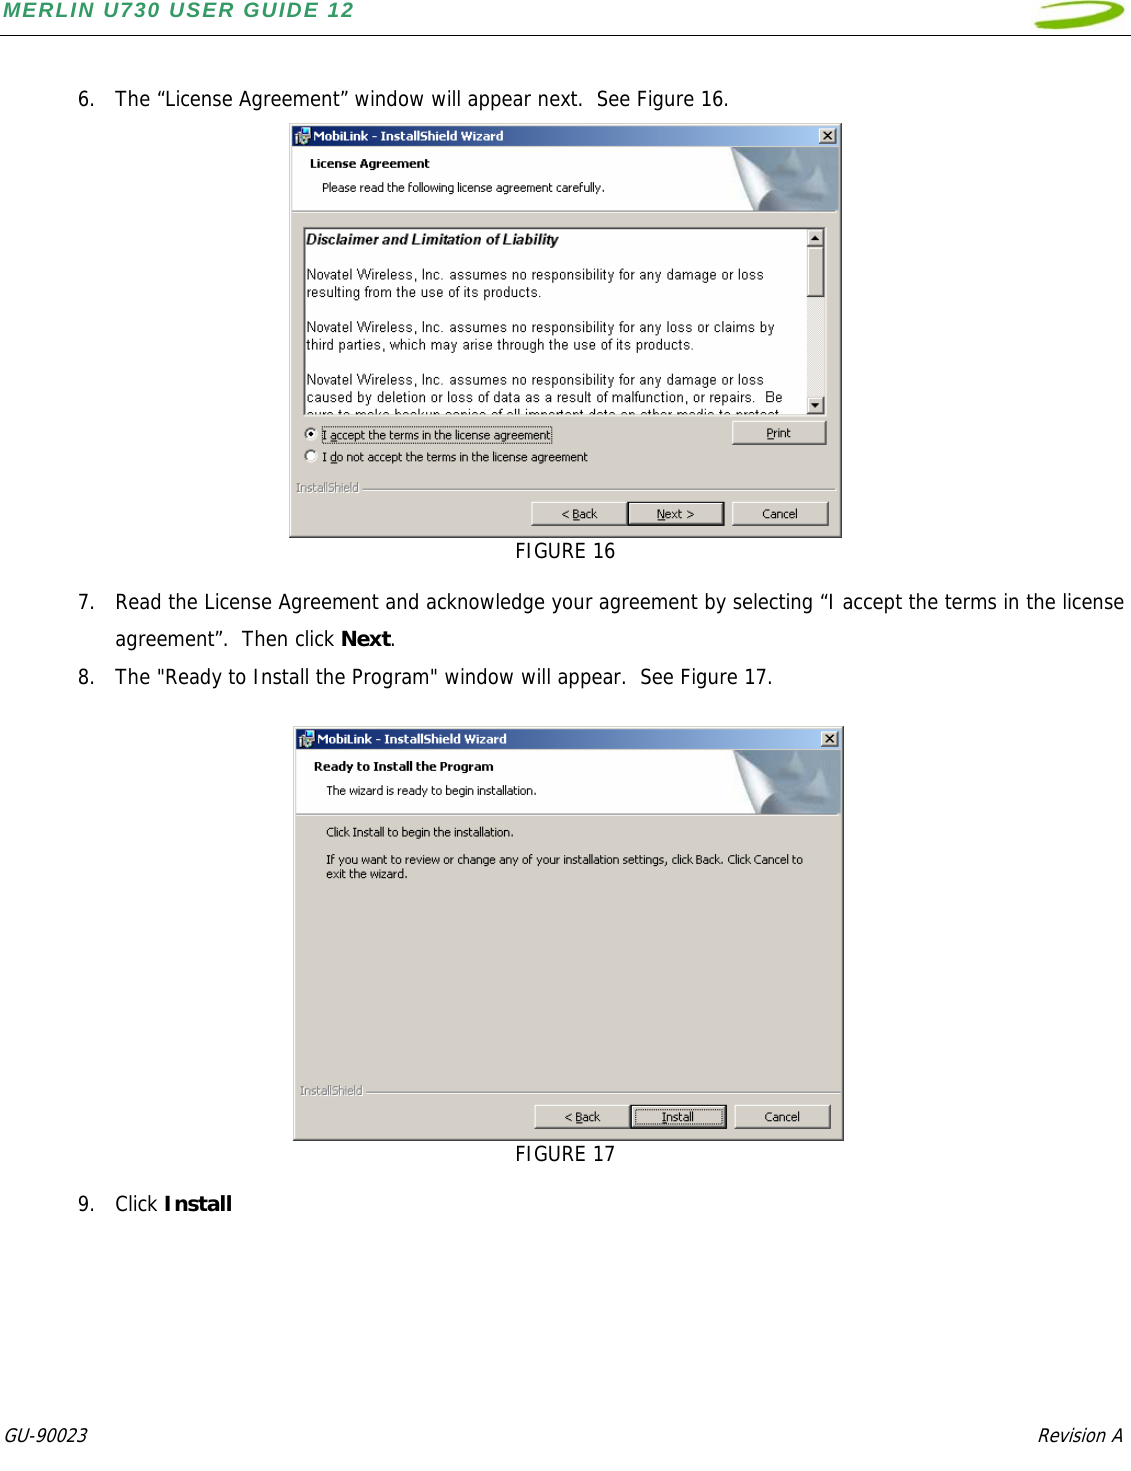 MERLIN U730 USER GUIDE 12  GU-90023            Revision A    6. The “License Agreement” window will appear next.  See Figure 16.  FIGURE 16  7. Read the License Agreement and acknowledge your agreement by selecting “I accept the terms in the license agreement”.  Then click Next. 8. The &quot;Ready to Install the Program&quot; window will appear.  See Figure 17.     FIGURE 17  9. Click Install 